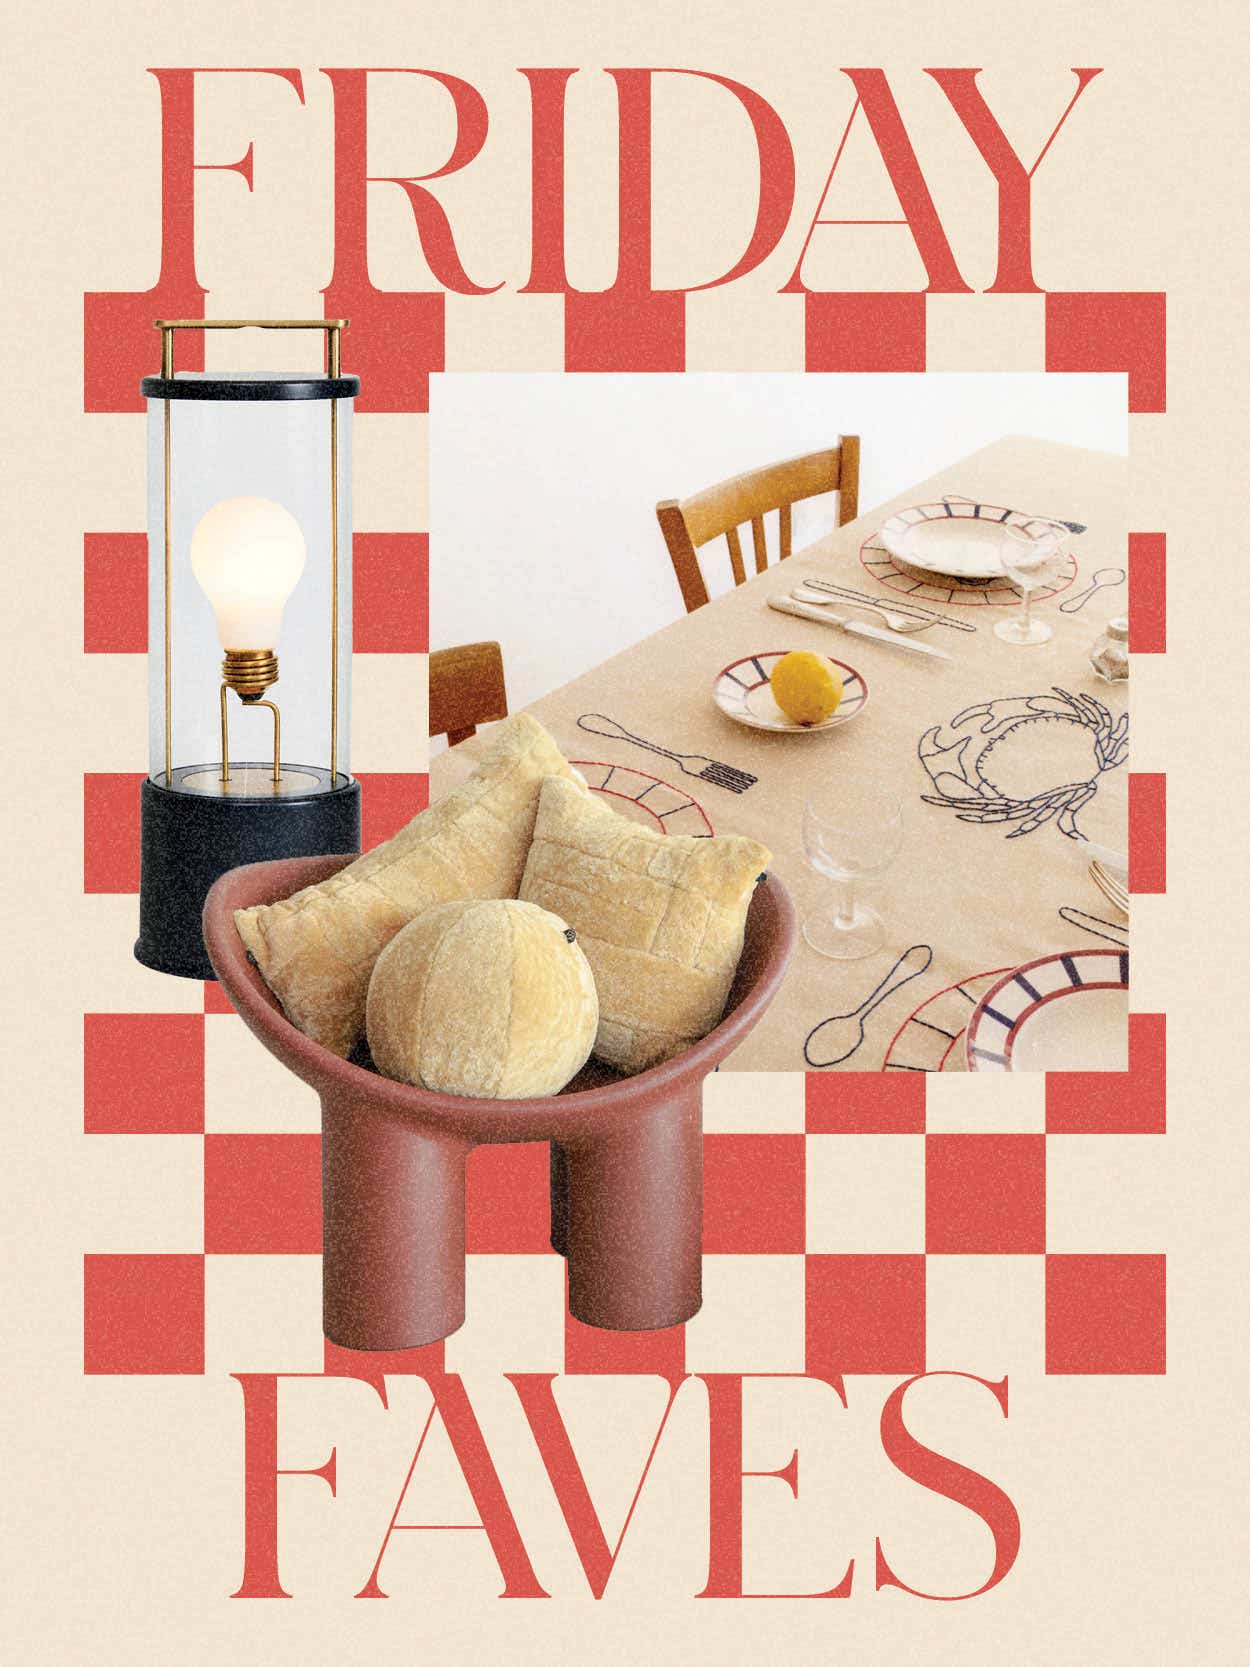 Friday faves collage with editor's picks